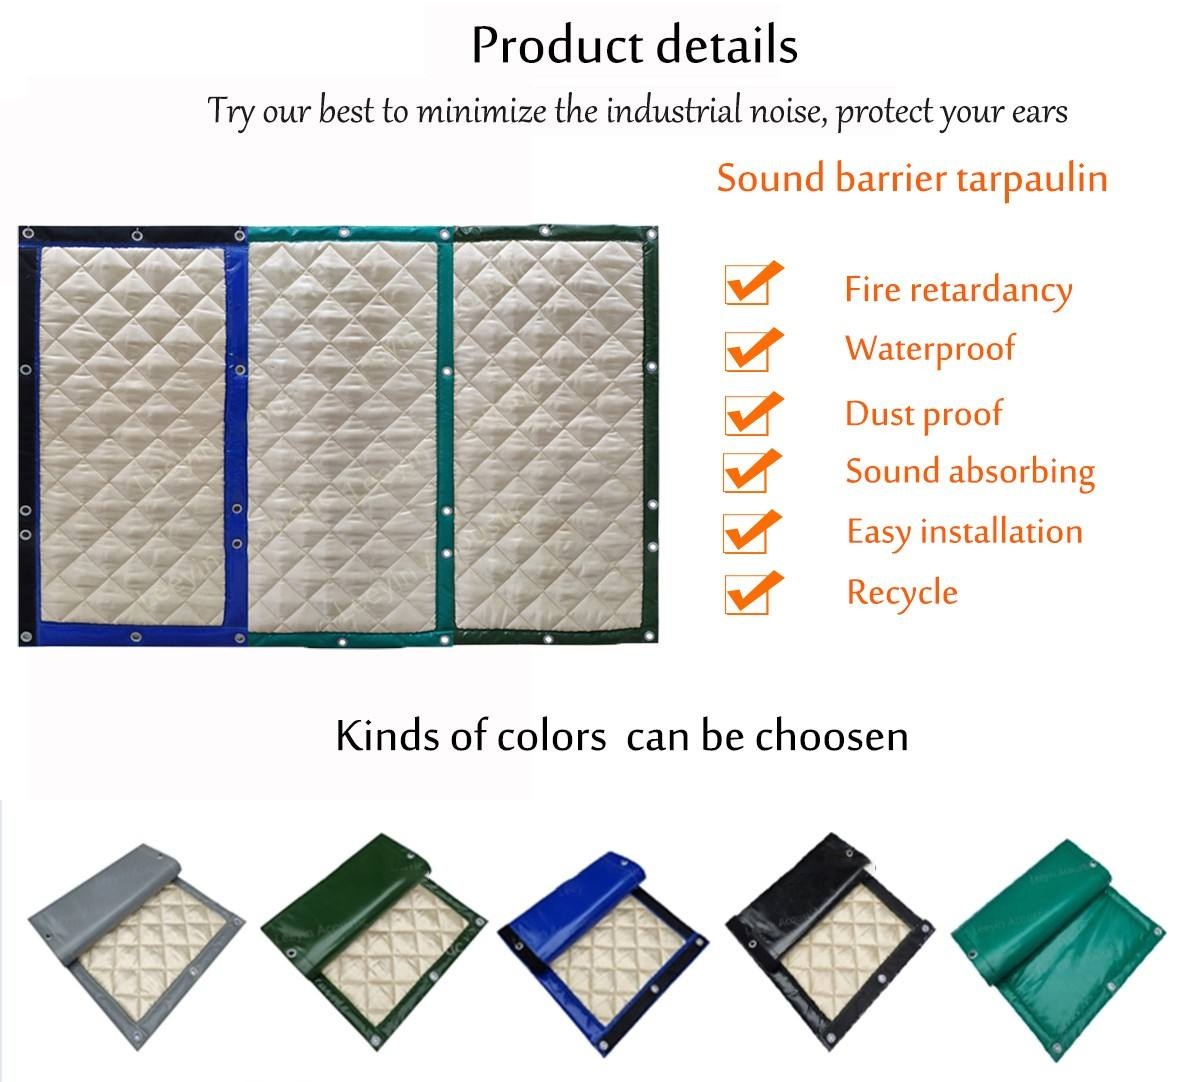 Litong Excellent Noise Barrier Soundproof Blanket isolate sound barrier fence curtains fireproof sound insulation mat